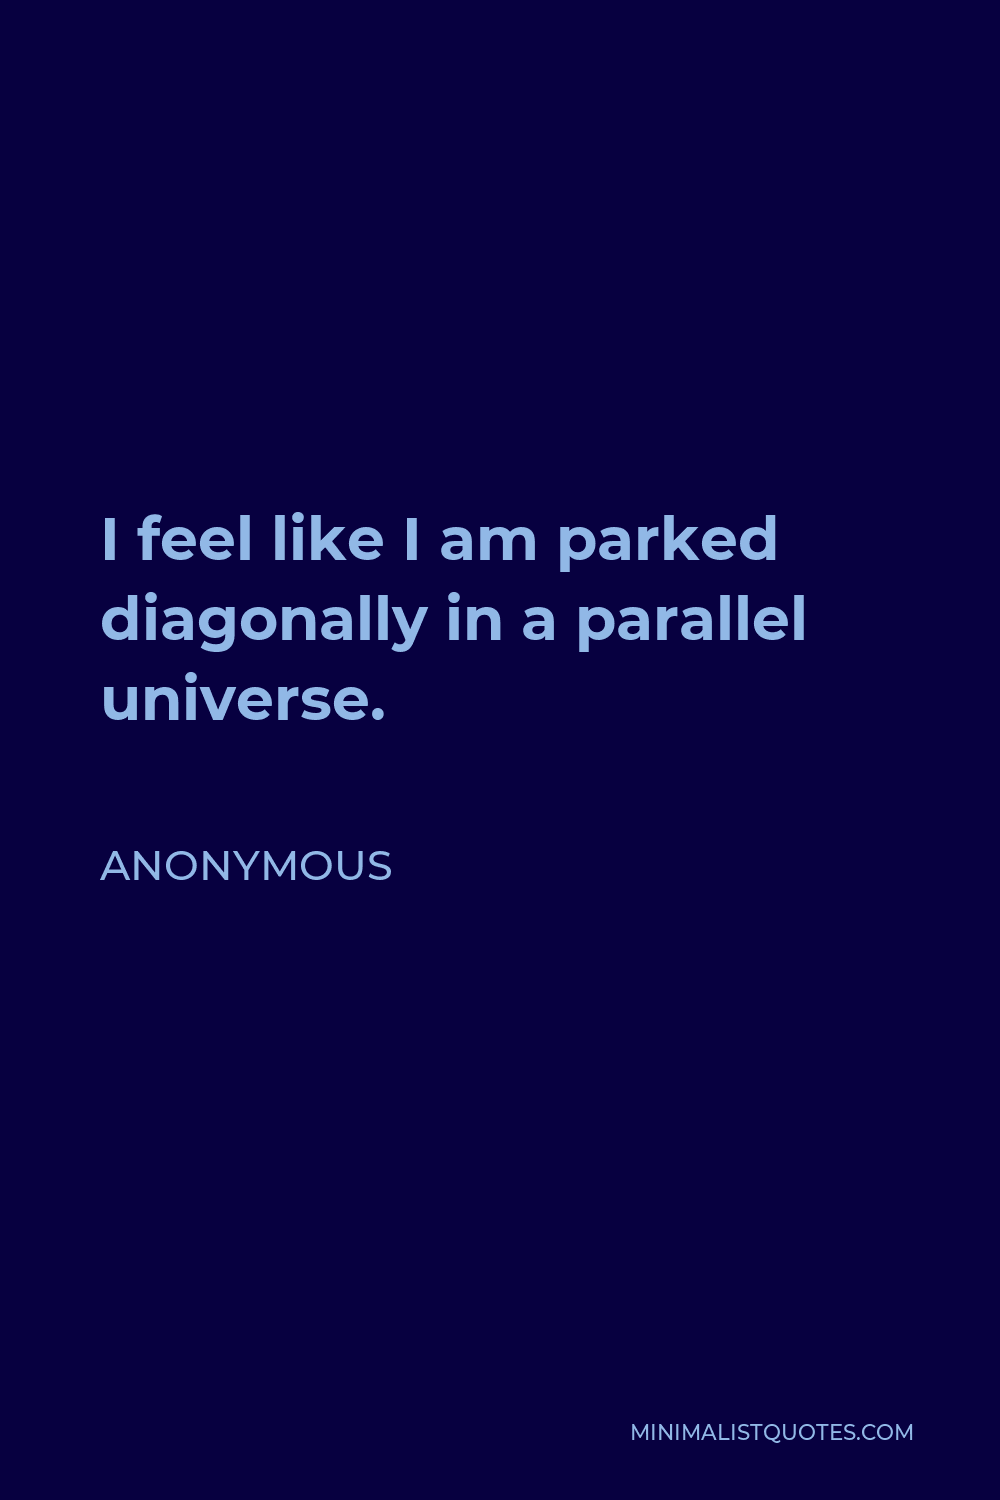 Anonymous Quote - I feel like I am parked diagonally in a parallel universe.